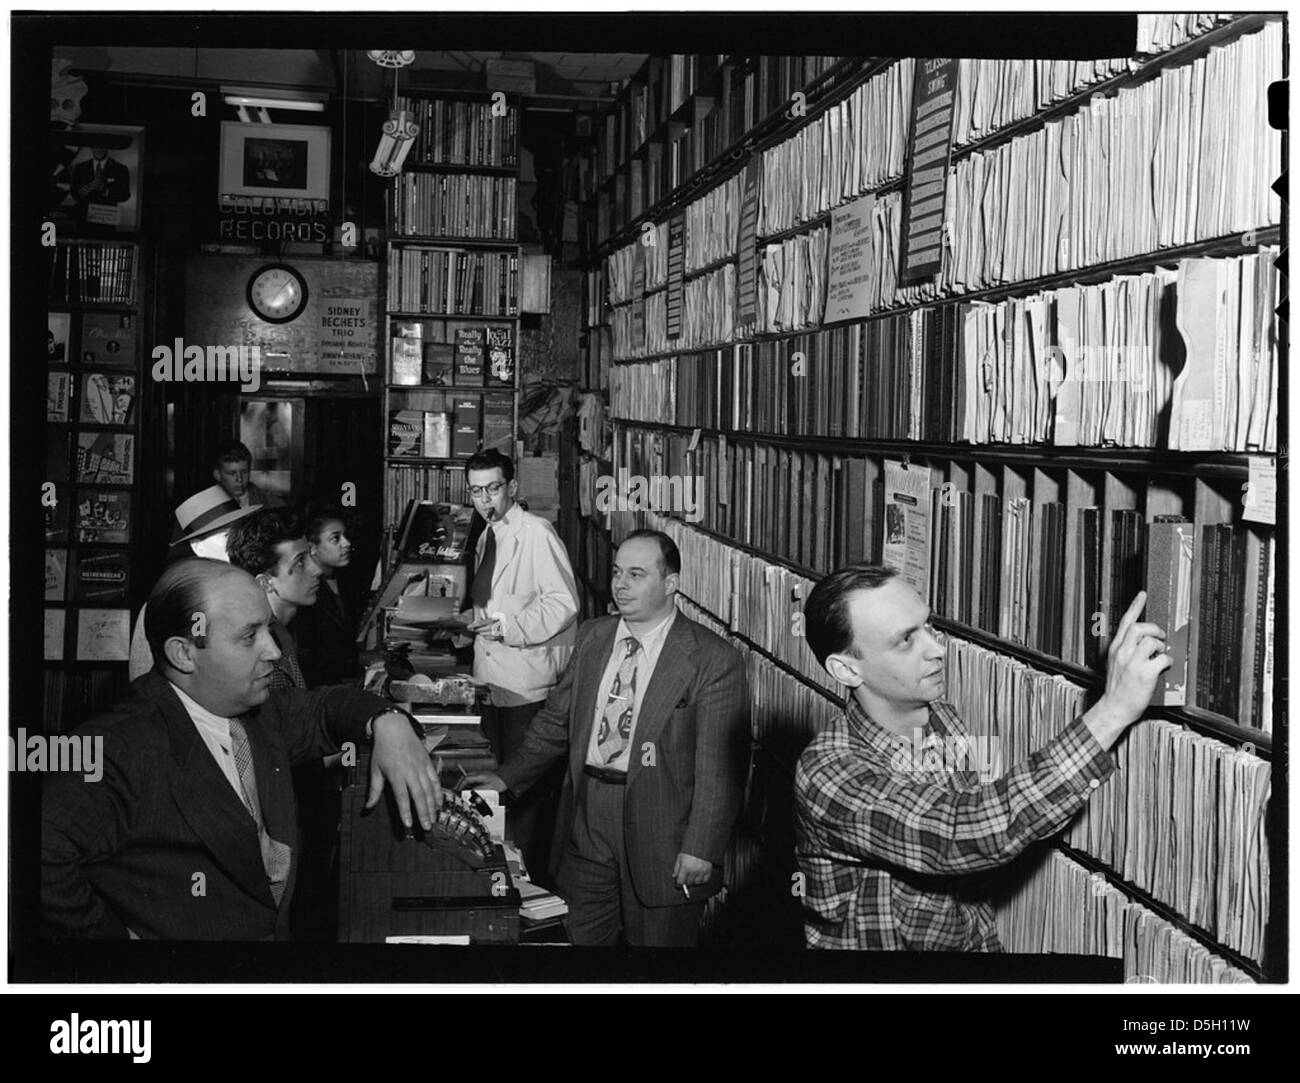 [Portrait of Milt Gabler, Herbie Hill, Lou Blum, and Jack Crystal, Commodore Record Shop, New York, N.Y., ca. Aug. 1947] (LOC) Stock Photo